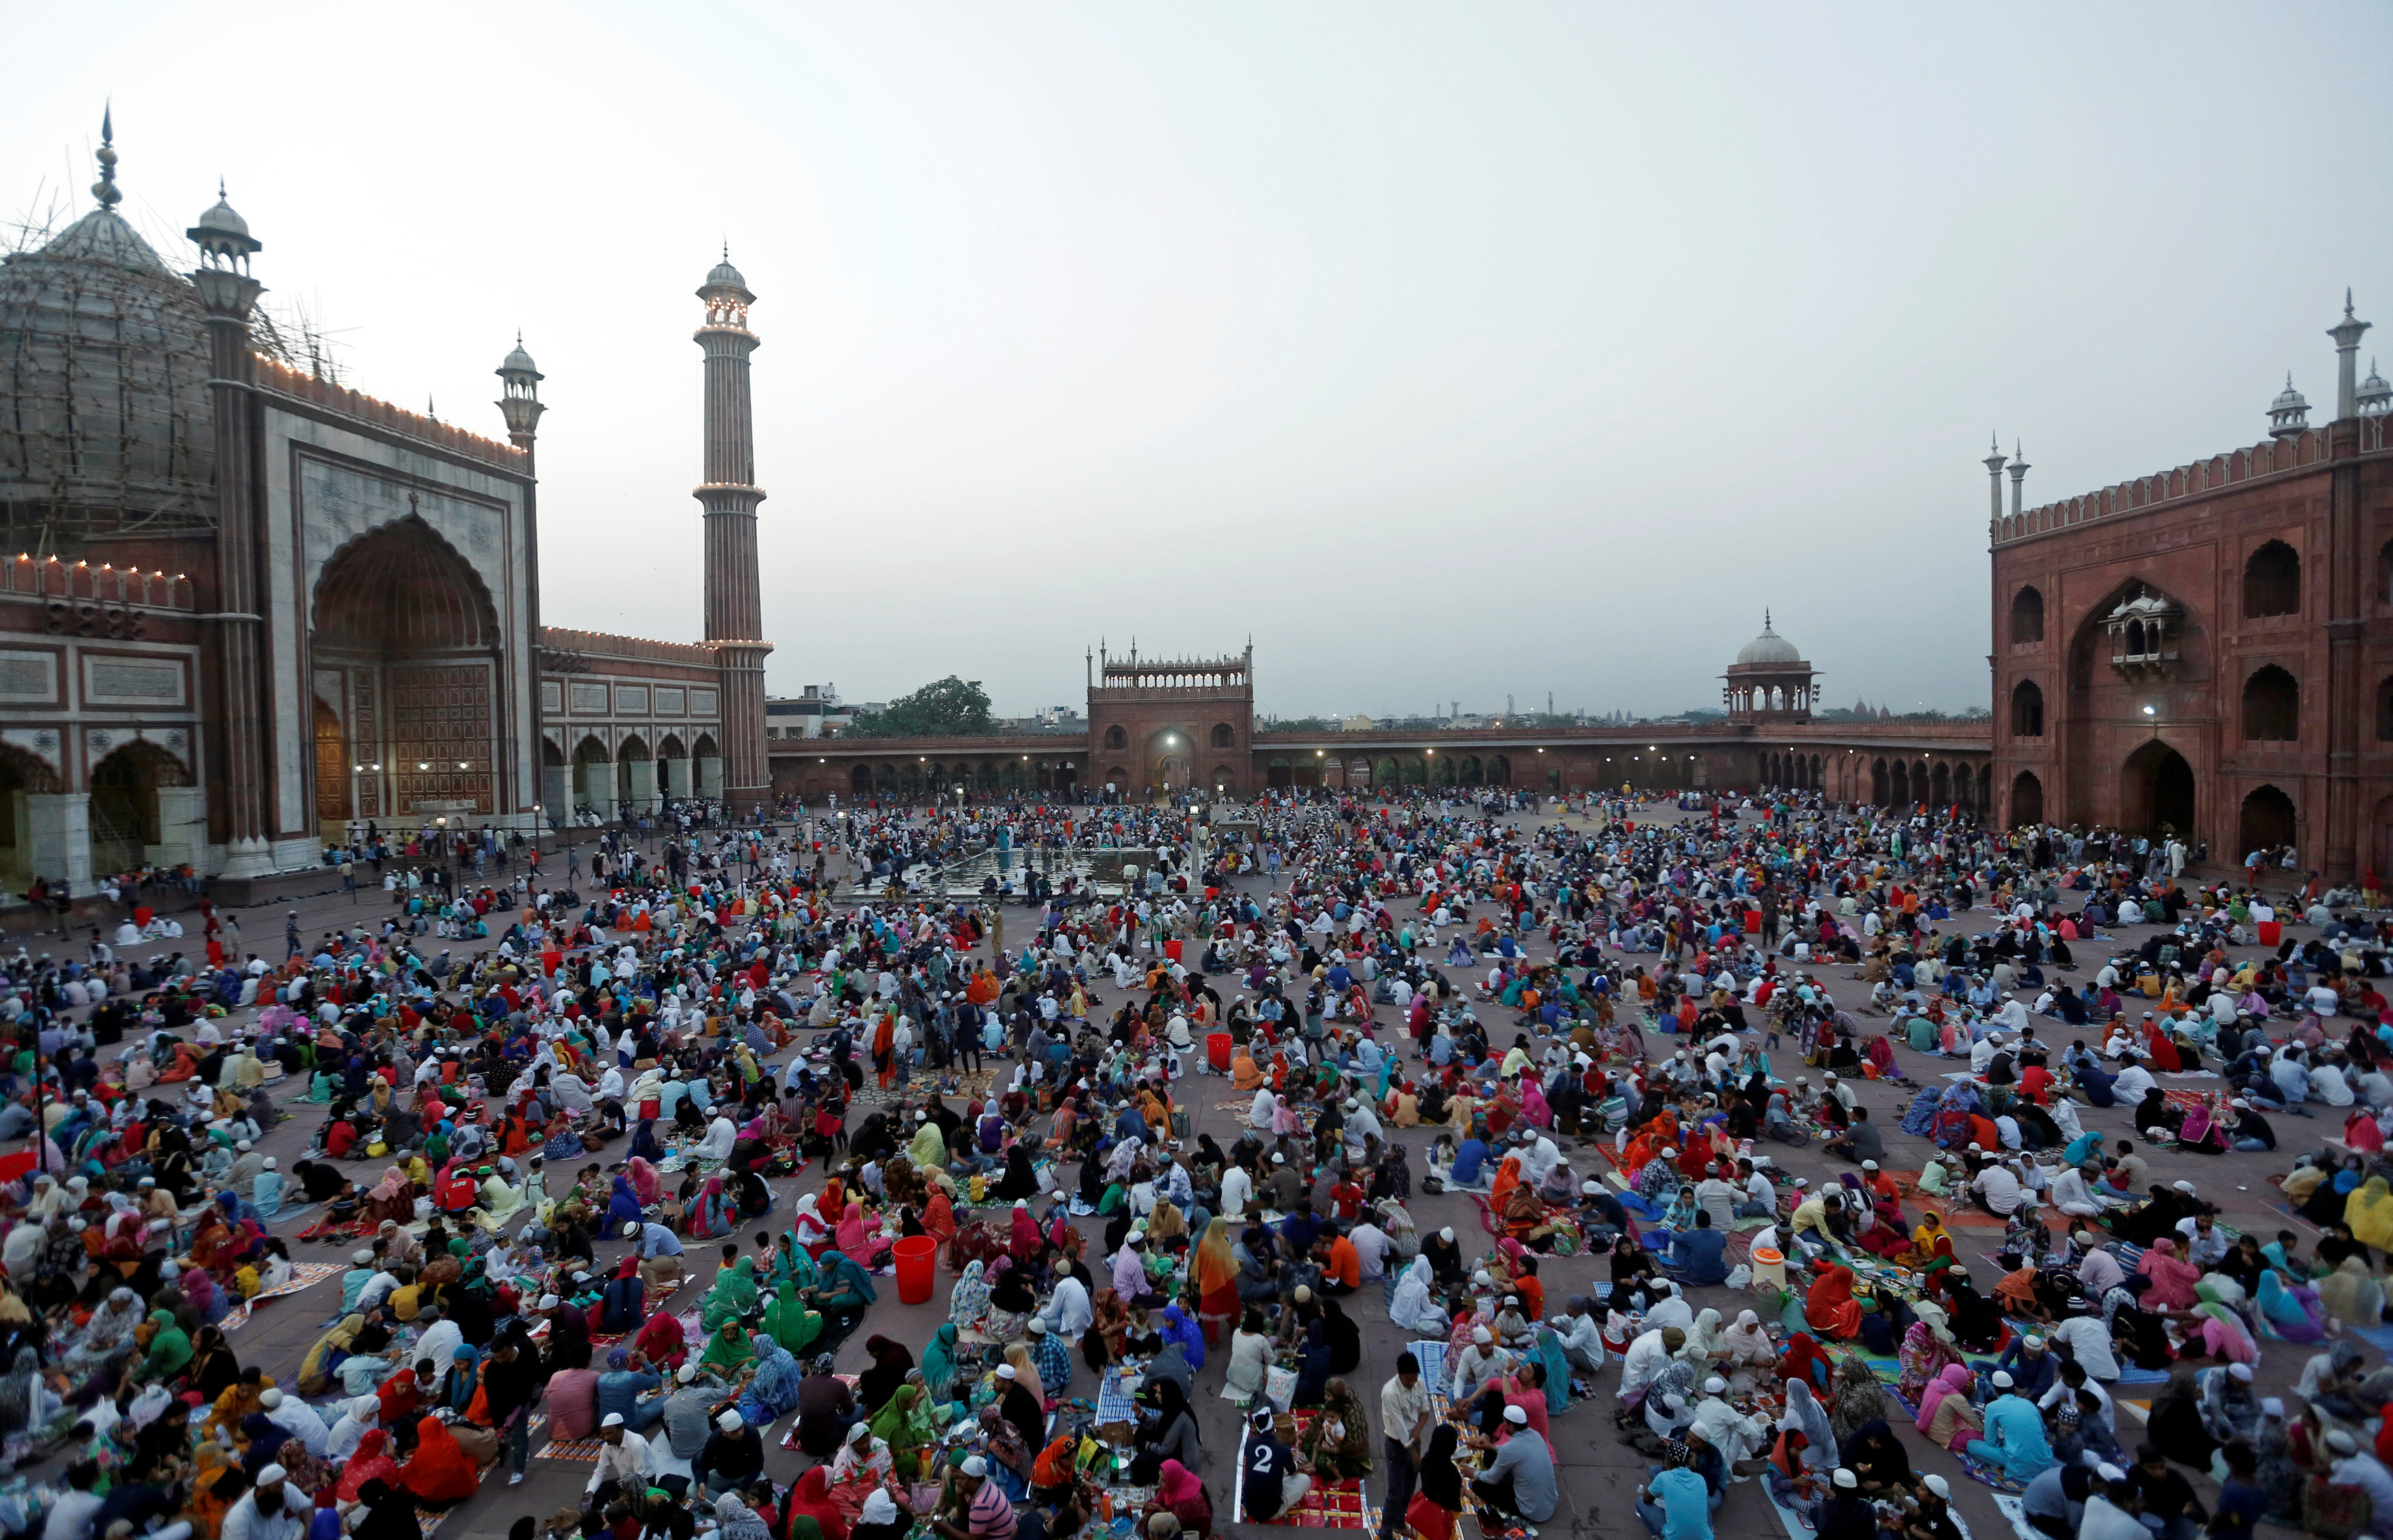 Muslims eat their iftar meal during the holy month of Ramadan at the Jama Masjid in the old quarters of Delhi